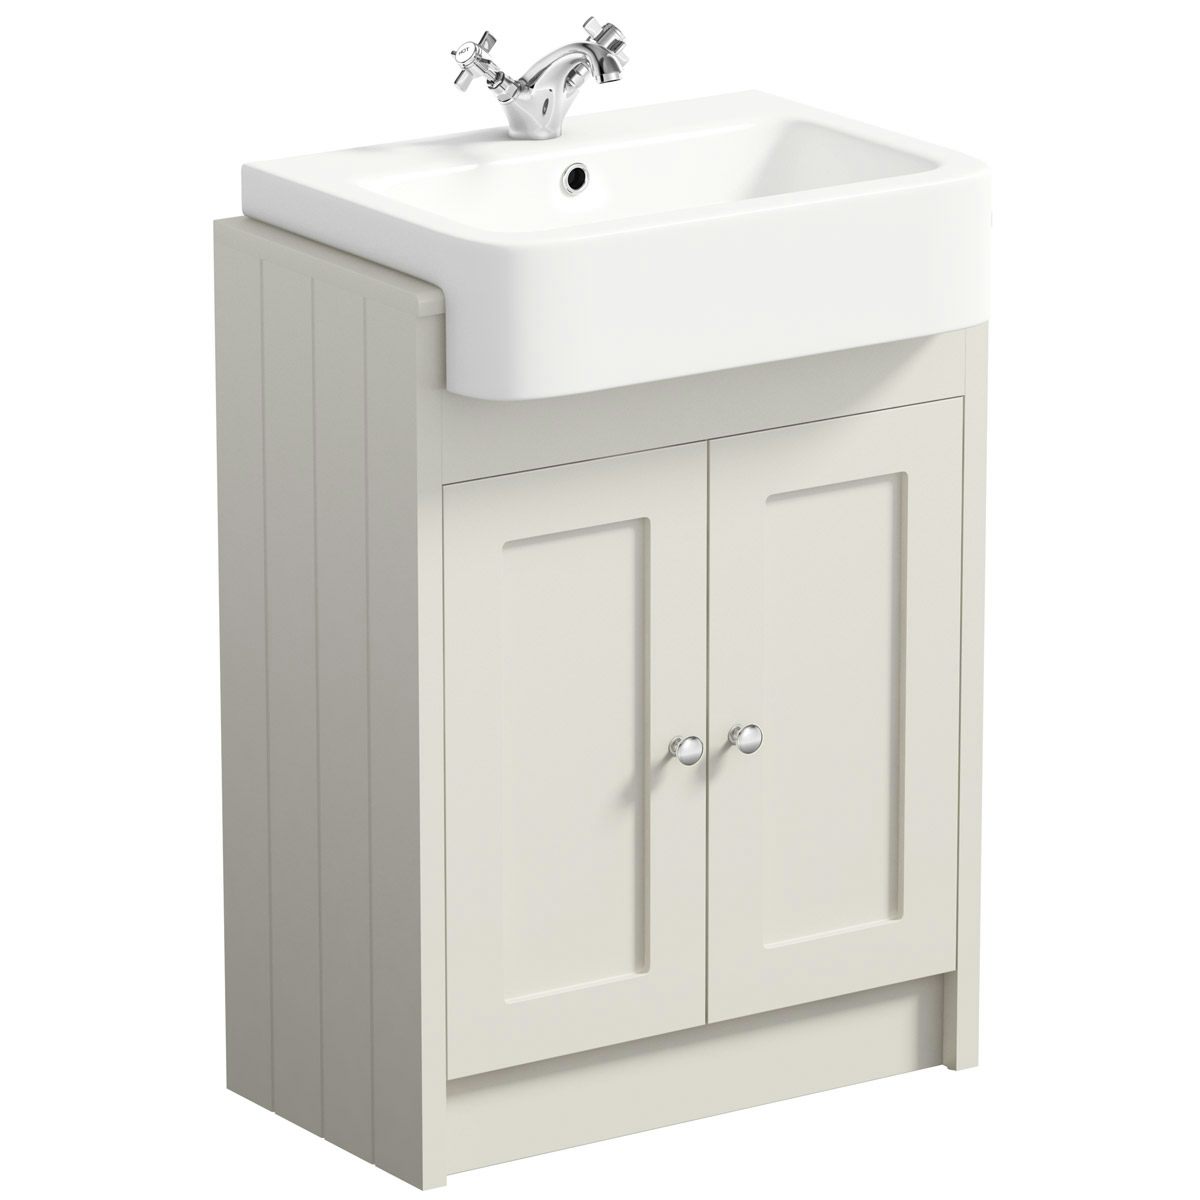 The Bath Co Dulwich stone ivory floorstanding vanity unit with semi recessed basin 600mm 